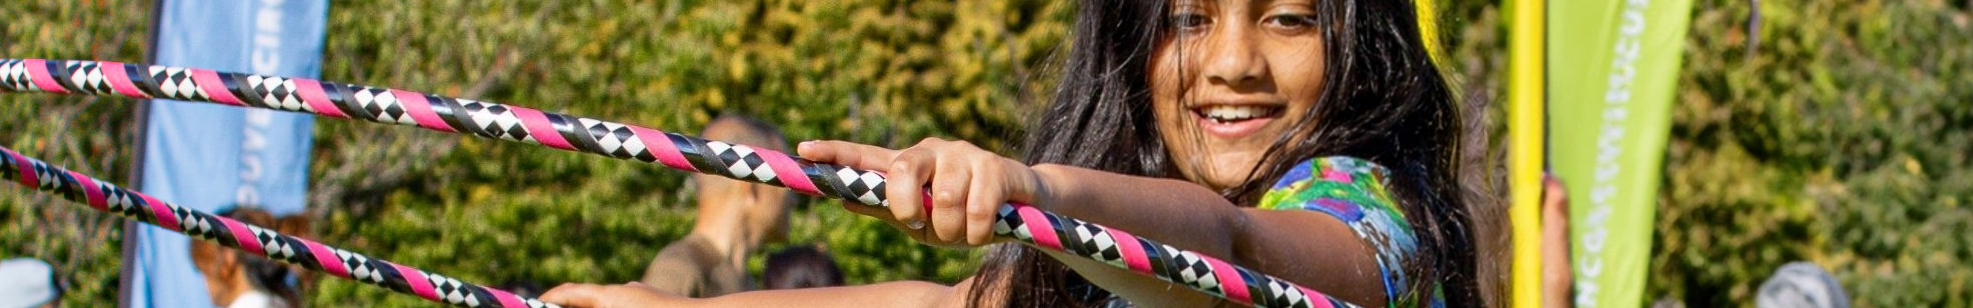 A young girl holding a hula hoop in her hand.